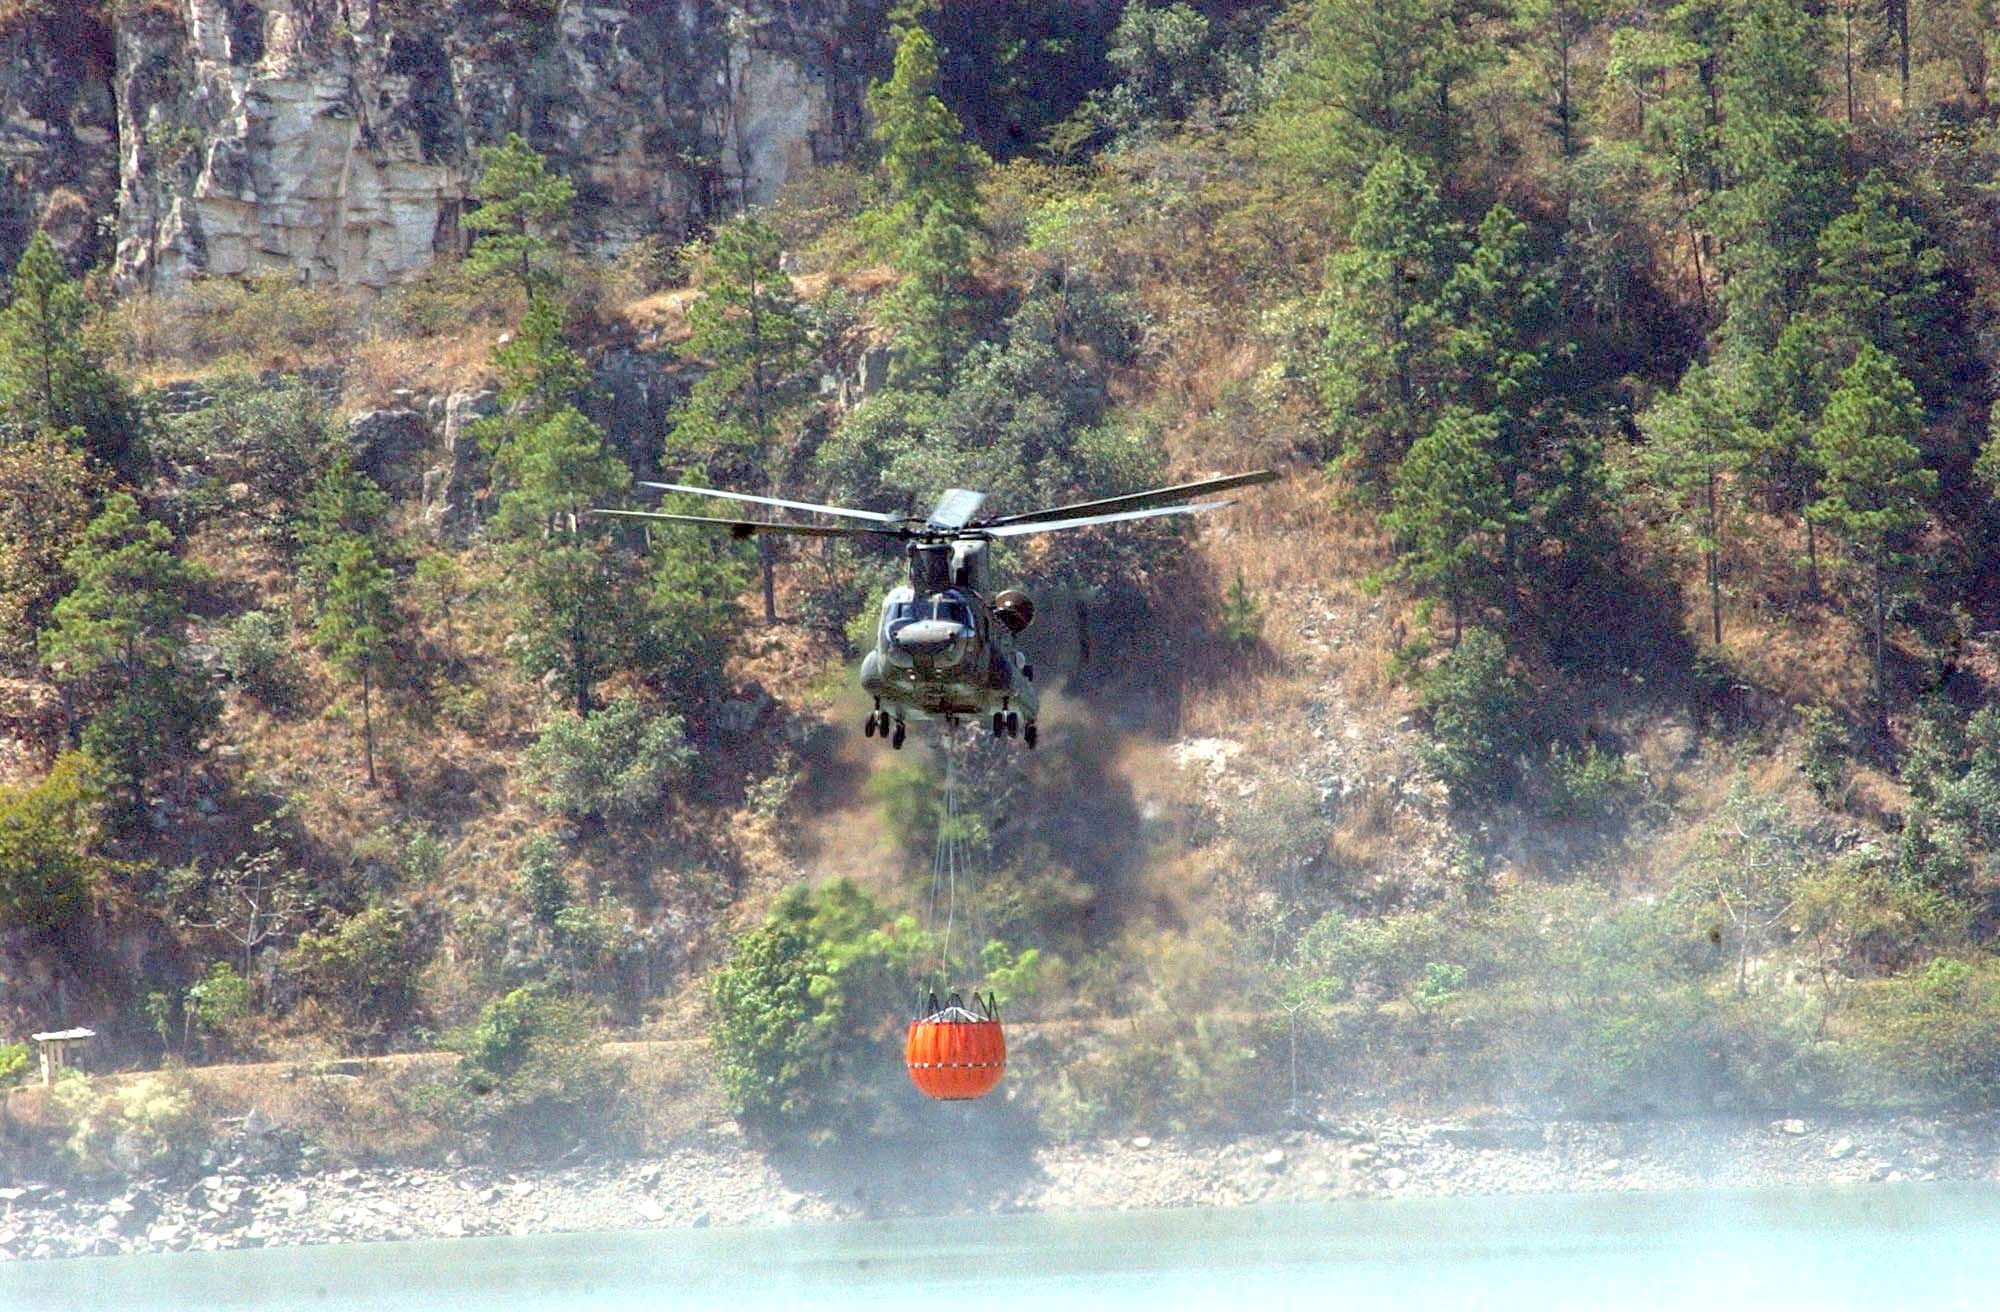 A CH-47 Chinook collects water with a “Bambi Bucket” system during a training mission March 15.  The 2,000-gallon bucket is designed to hang from the helicopter, collect water, and disperse the water at the touch of a button over a fire.  The training took place in small body of water along the Rio del Hombre, near the town of Zambrano, Honduras. (U.S. Air Force photo/Tech. Sgt. Sonny Cohrs)